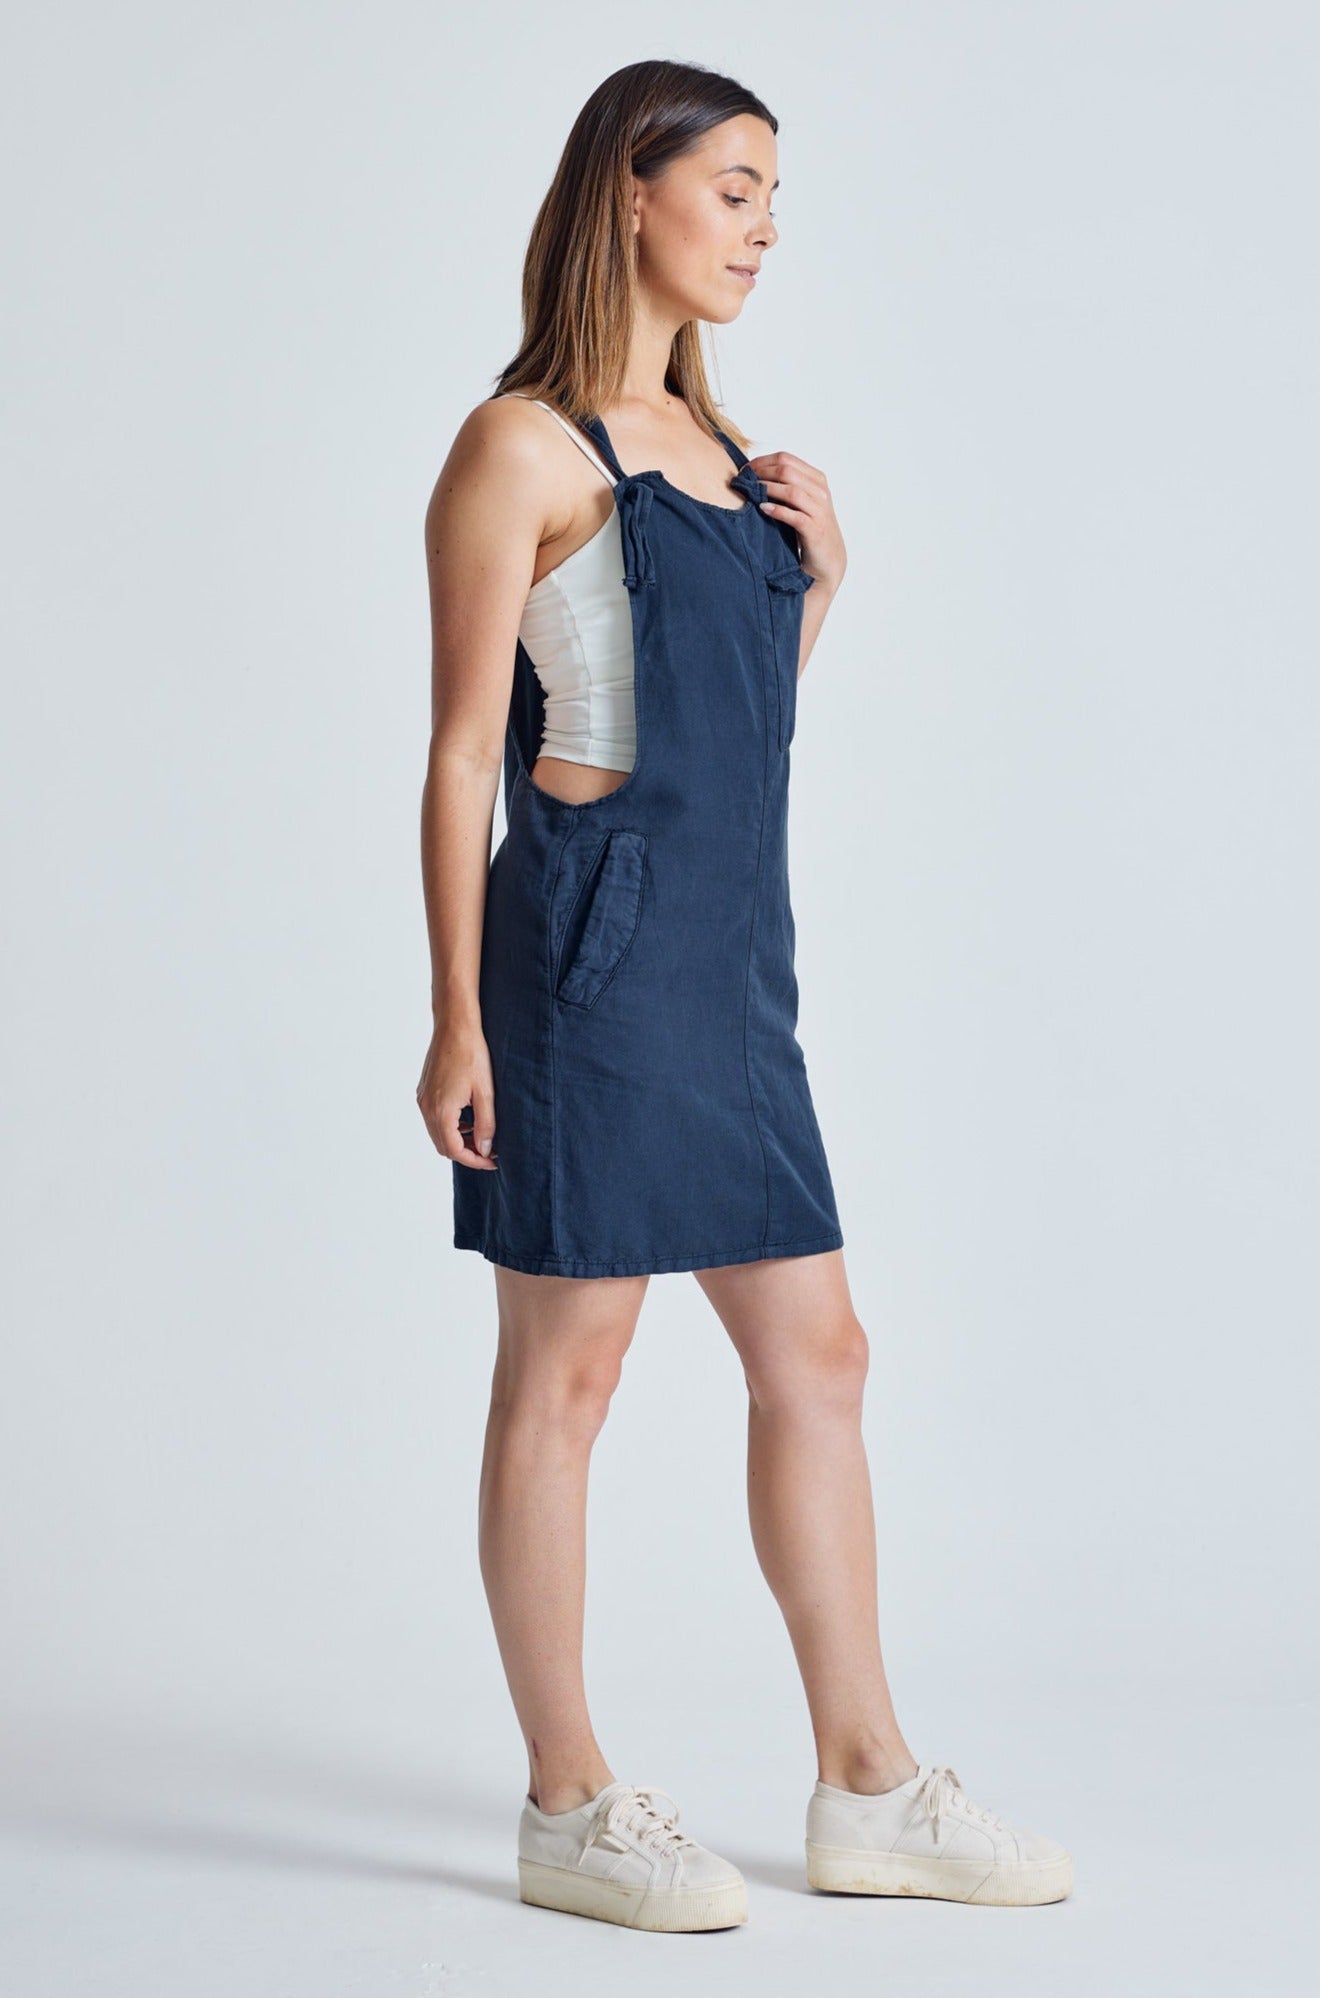 Navy Peggy Pocket Dungaree Dress - GOTS Certified Organic Cotton and Linen